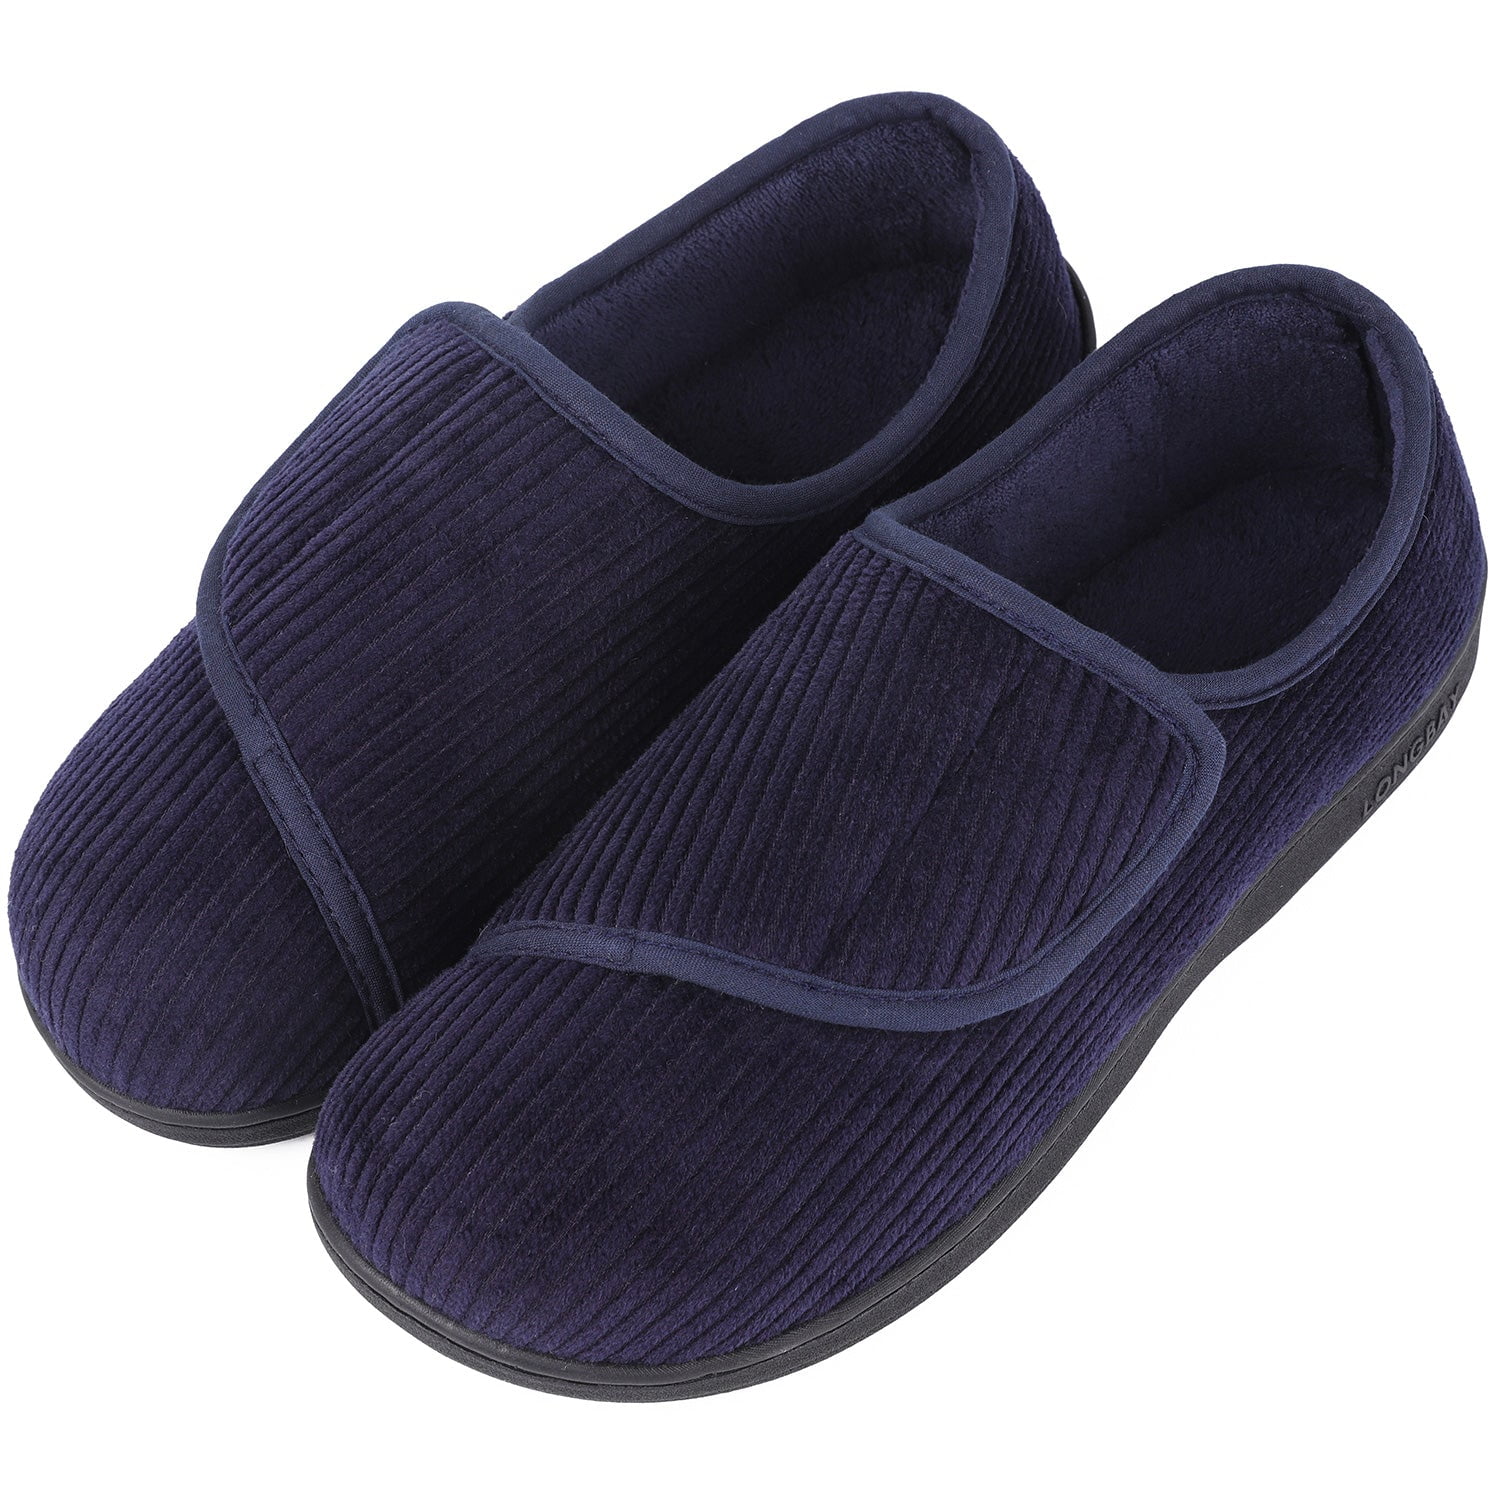 LongBay Mens Cozy Memory Foam Slippers Comfy House Shoes Large /11-12, Solid Light Gray 